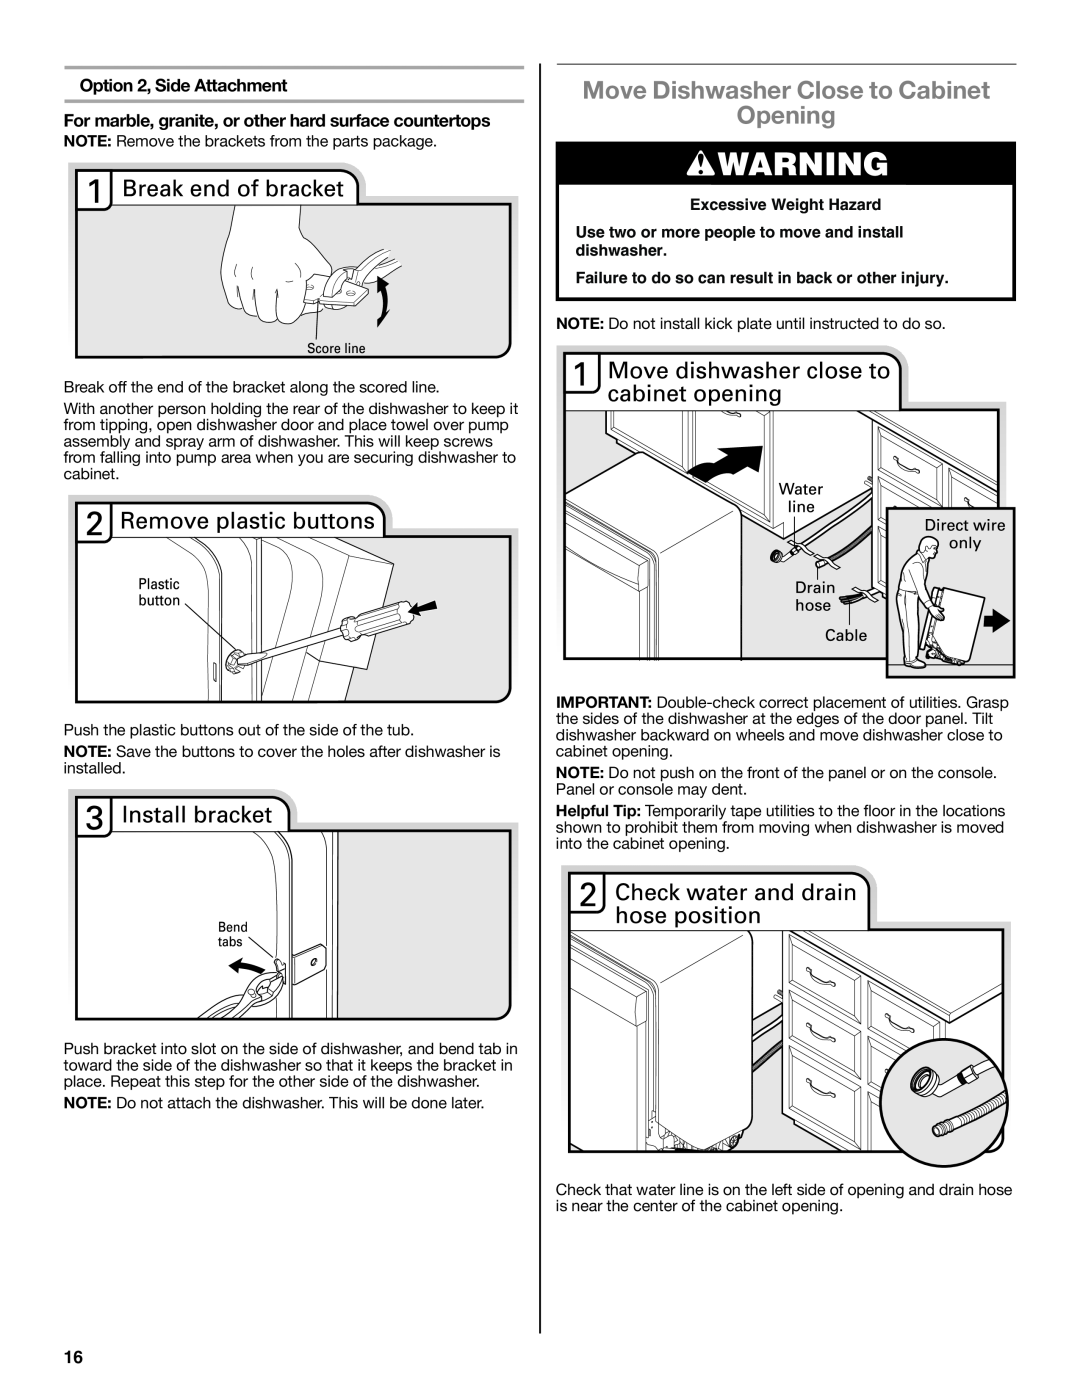 Maytag W10532762A installation instructions Move Dishwasher Close to Cabinet Opening, Option 2, Side Attachment 